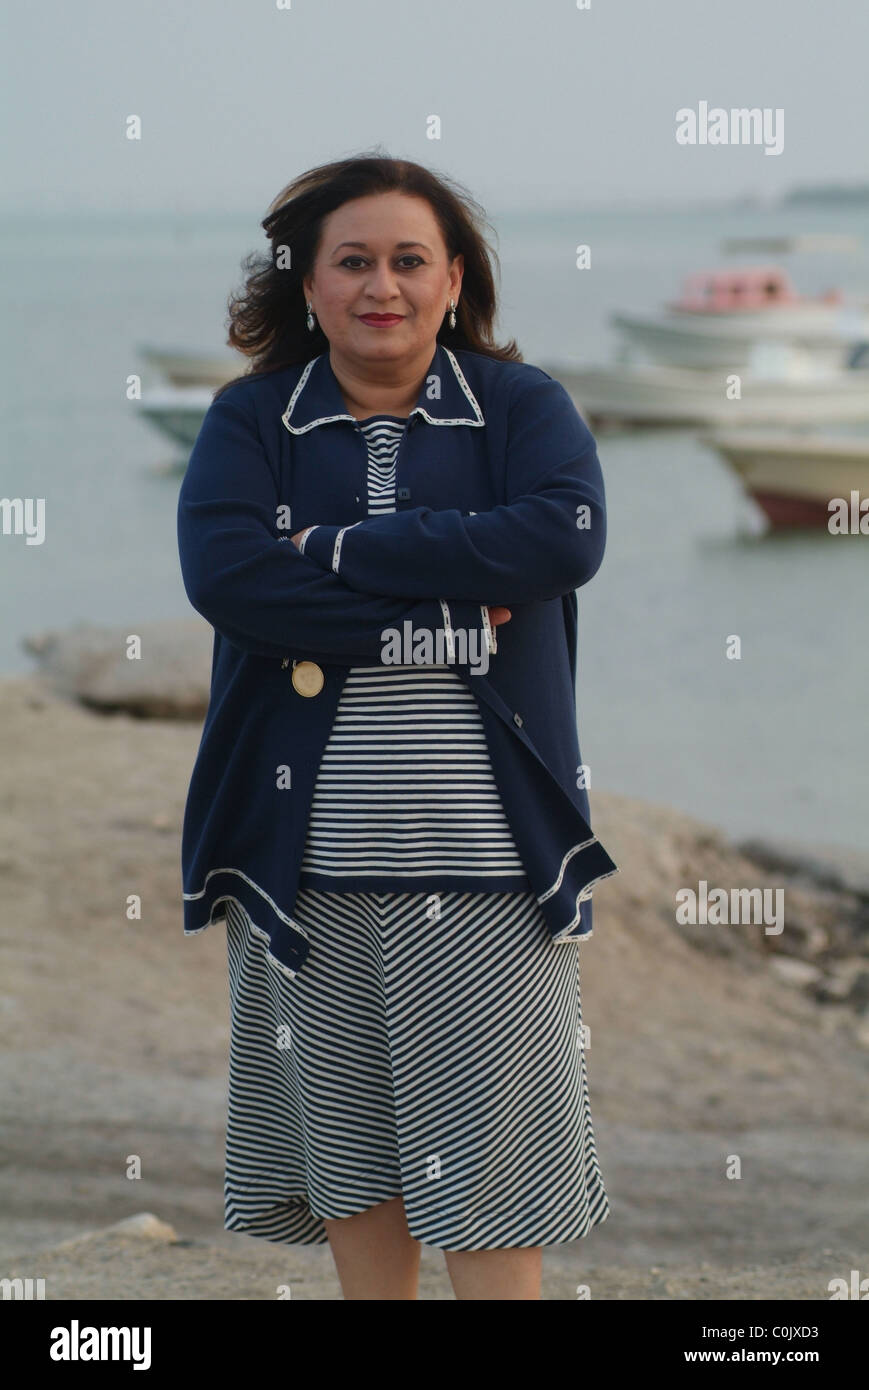 Ghada Jamsheer of Bahrain, a leading women's rights activist and head of the Women's Petition Committee, in Manama, Bahrain. Stock Photo